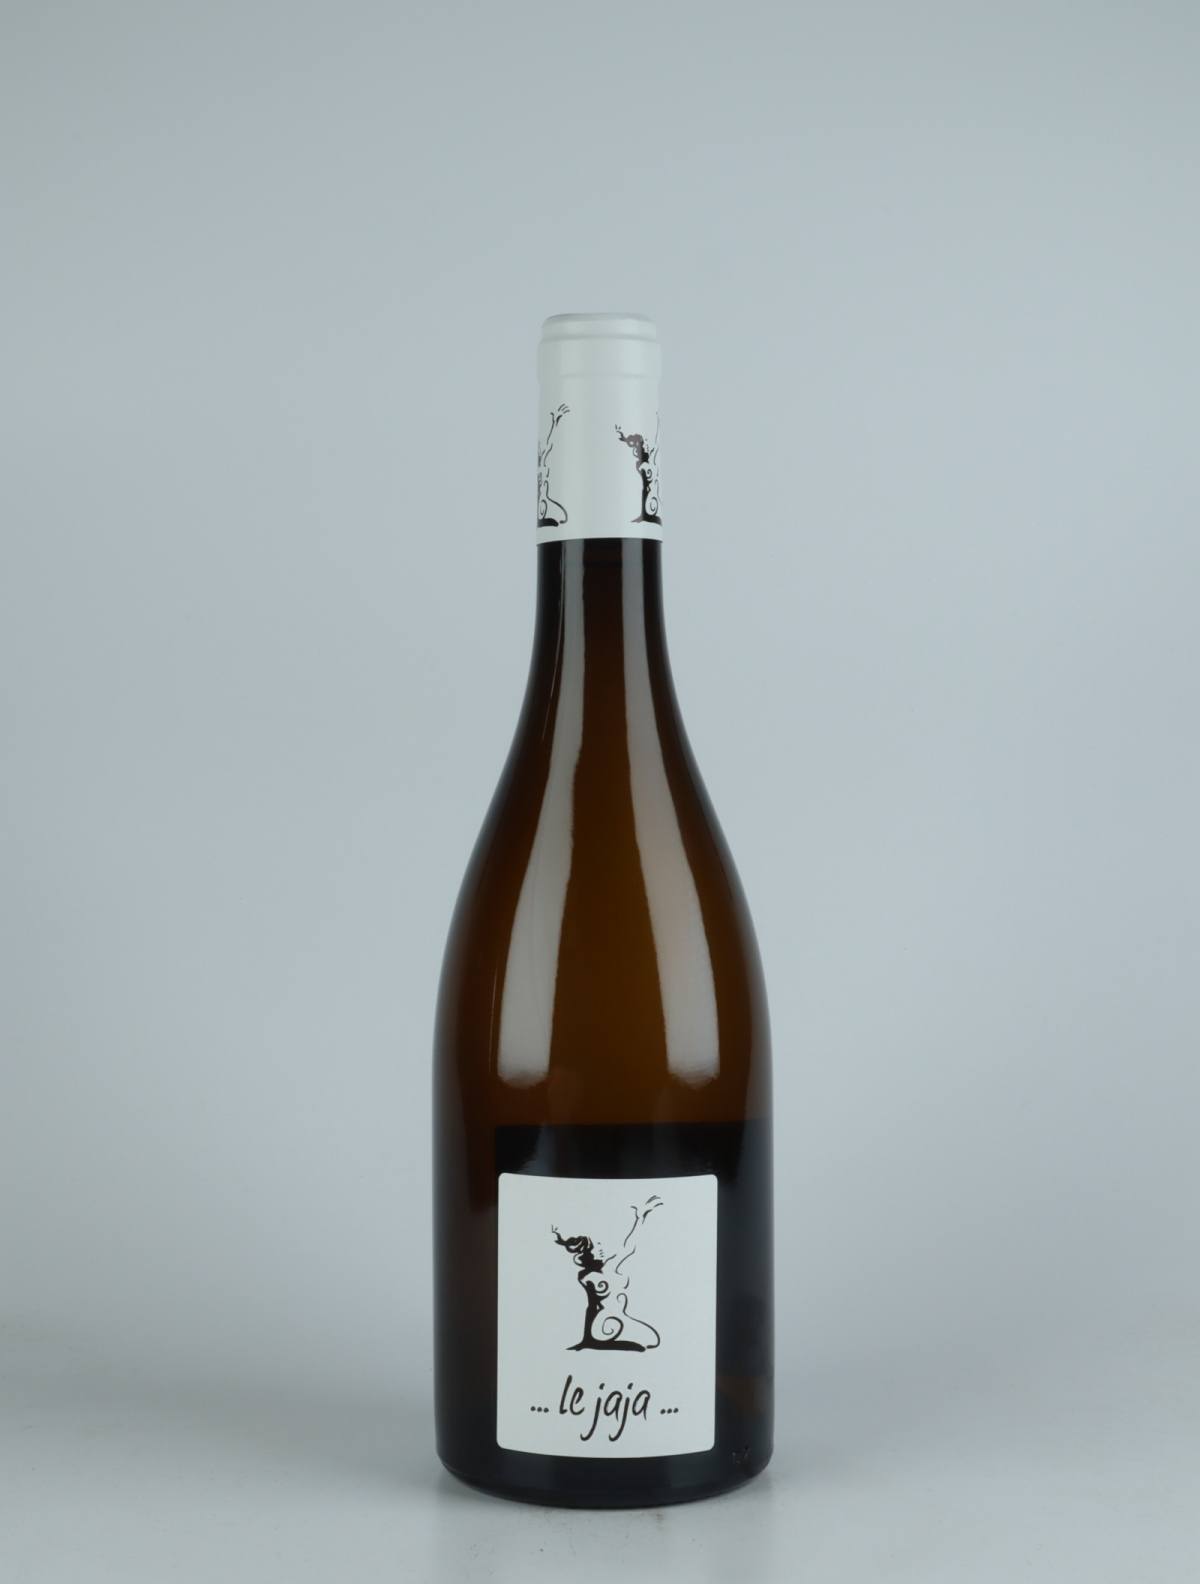 A bottle 2021 Chignin - Le Jaja White wine from Gilles Berlioz, Savoie in France